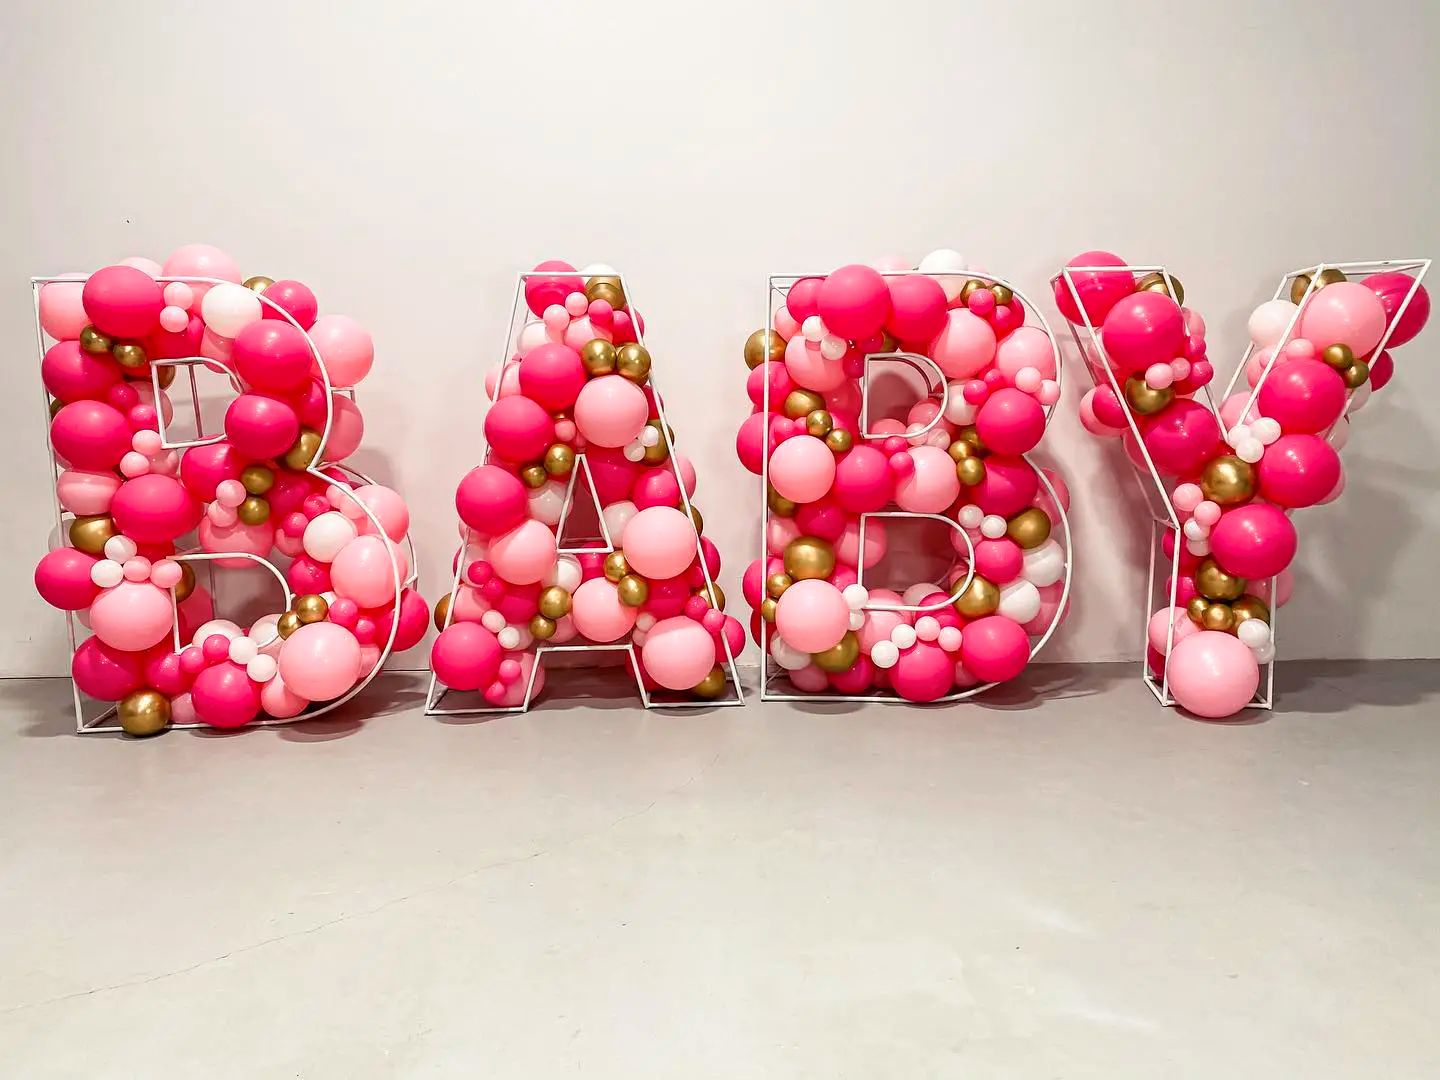 10 Simple Balloon Decoration Ideas: The Greatest Decorations for That Special Occasion